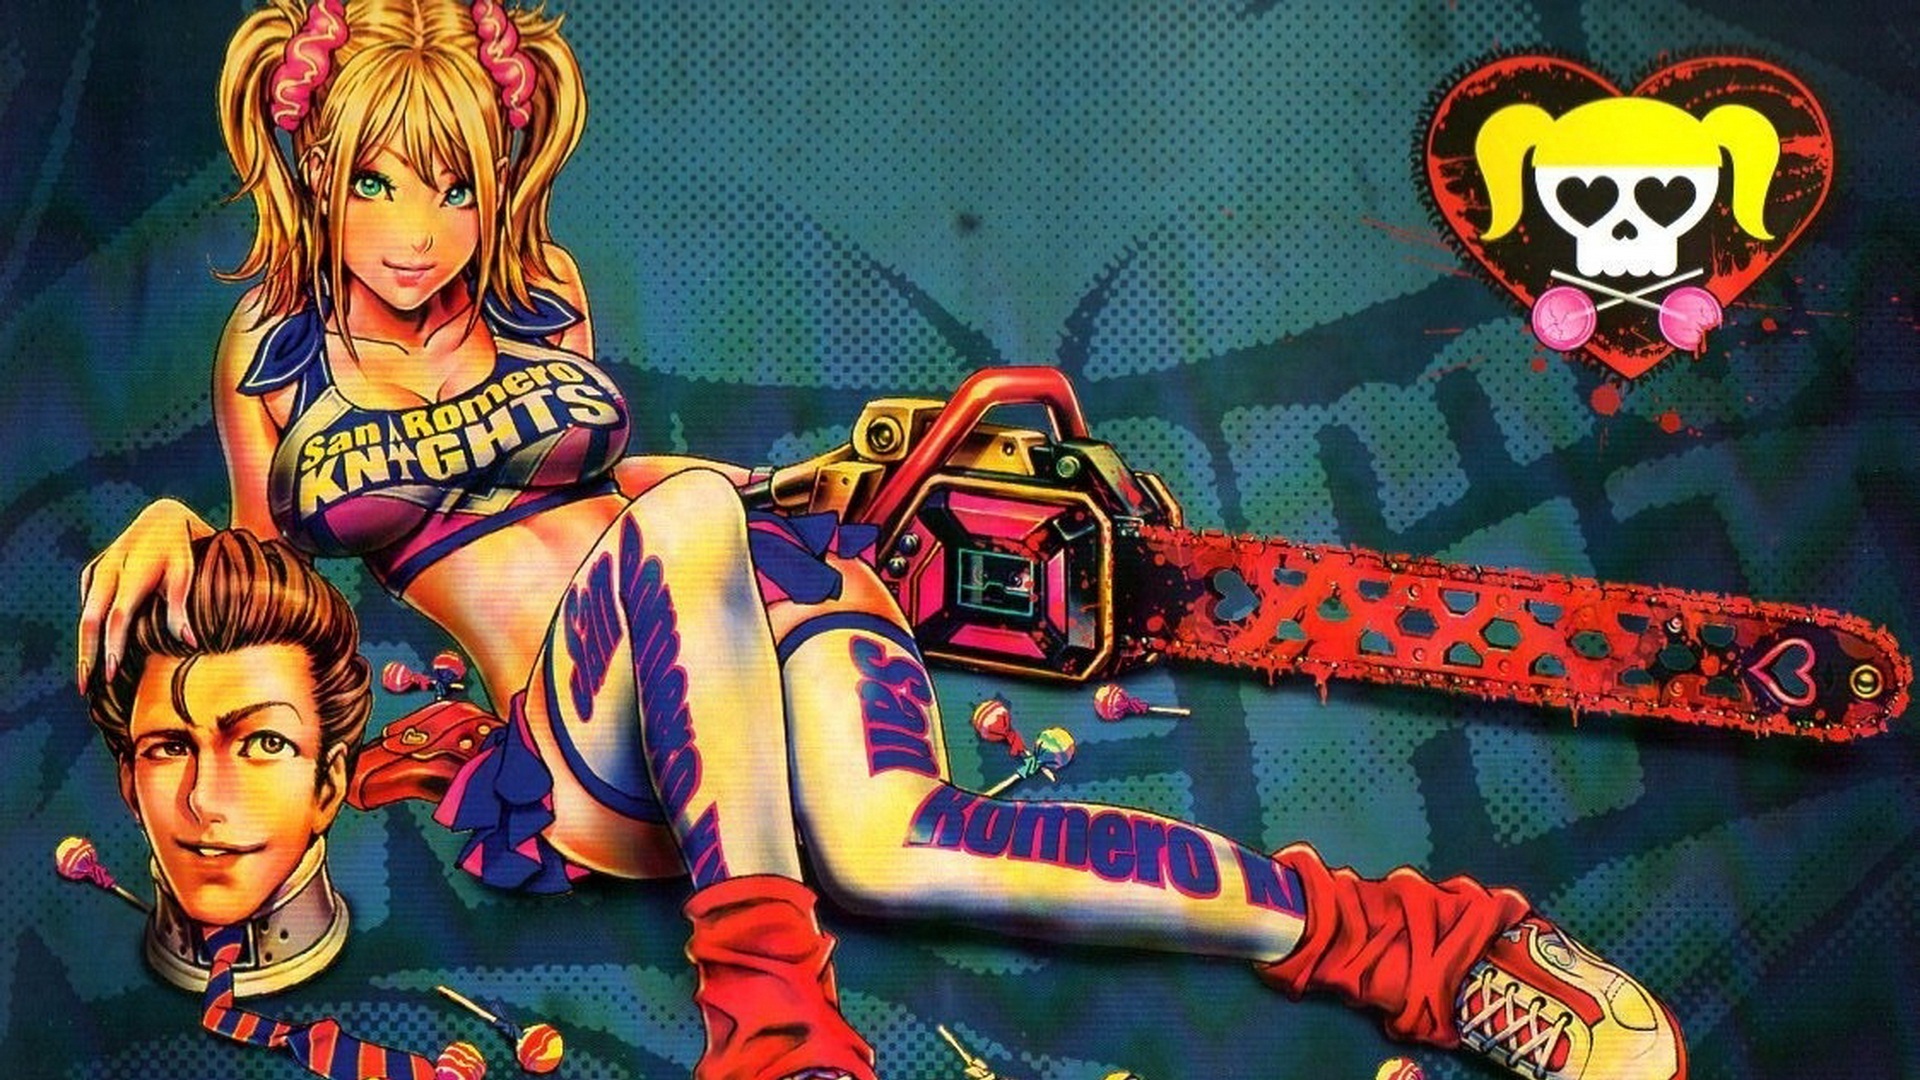 Wallpaper 14 Wallpaper From Lollipop Chainsaw Gamepressure Com Images, Photos, Reviews